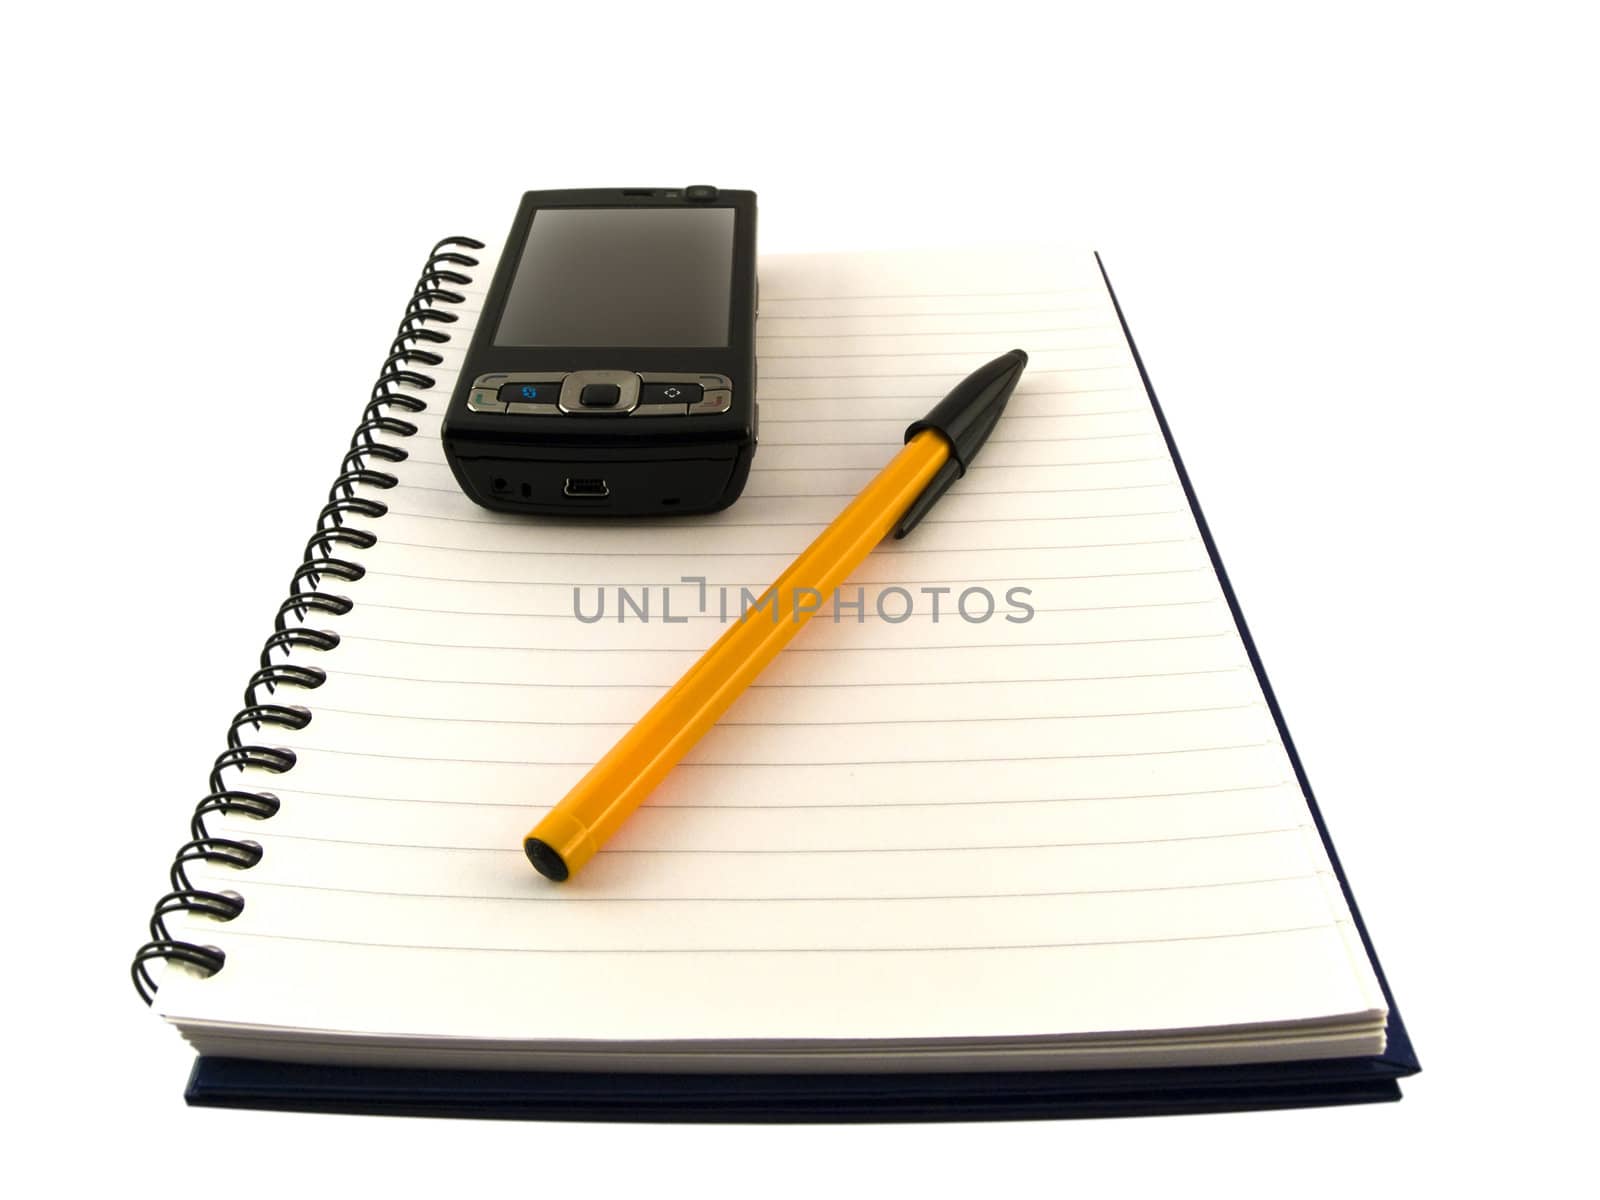 Mobile Phone and Biro Ballpoint Pen on Notepad Isolated over White